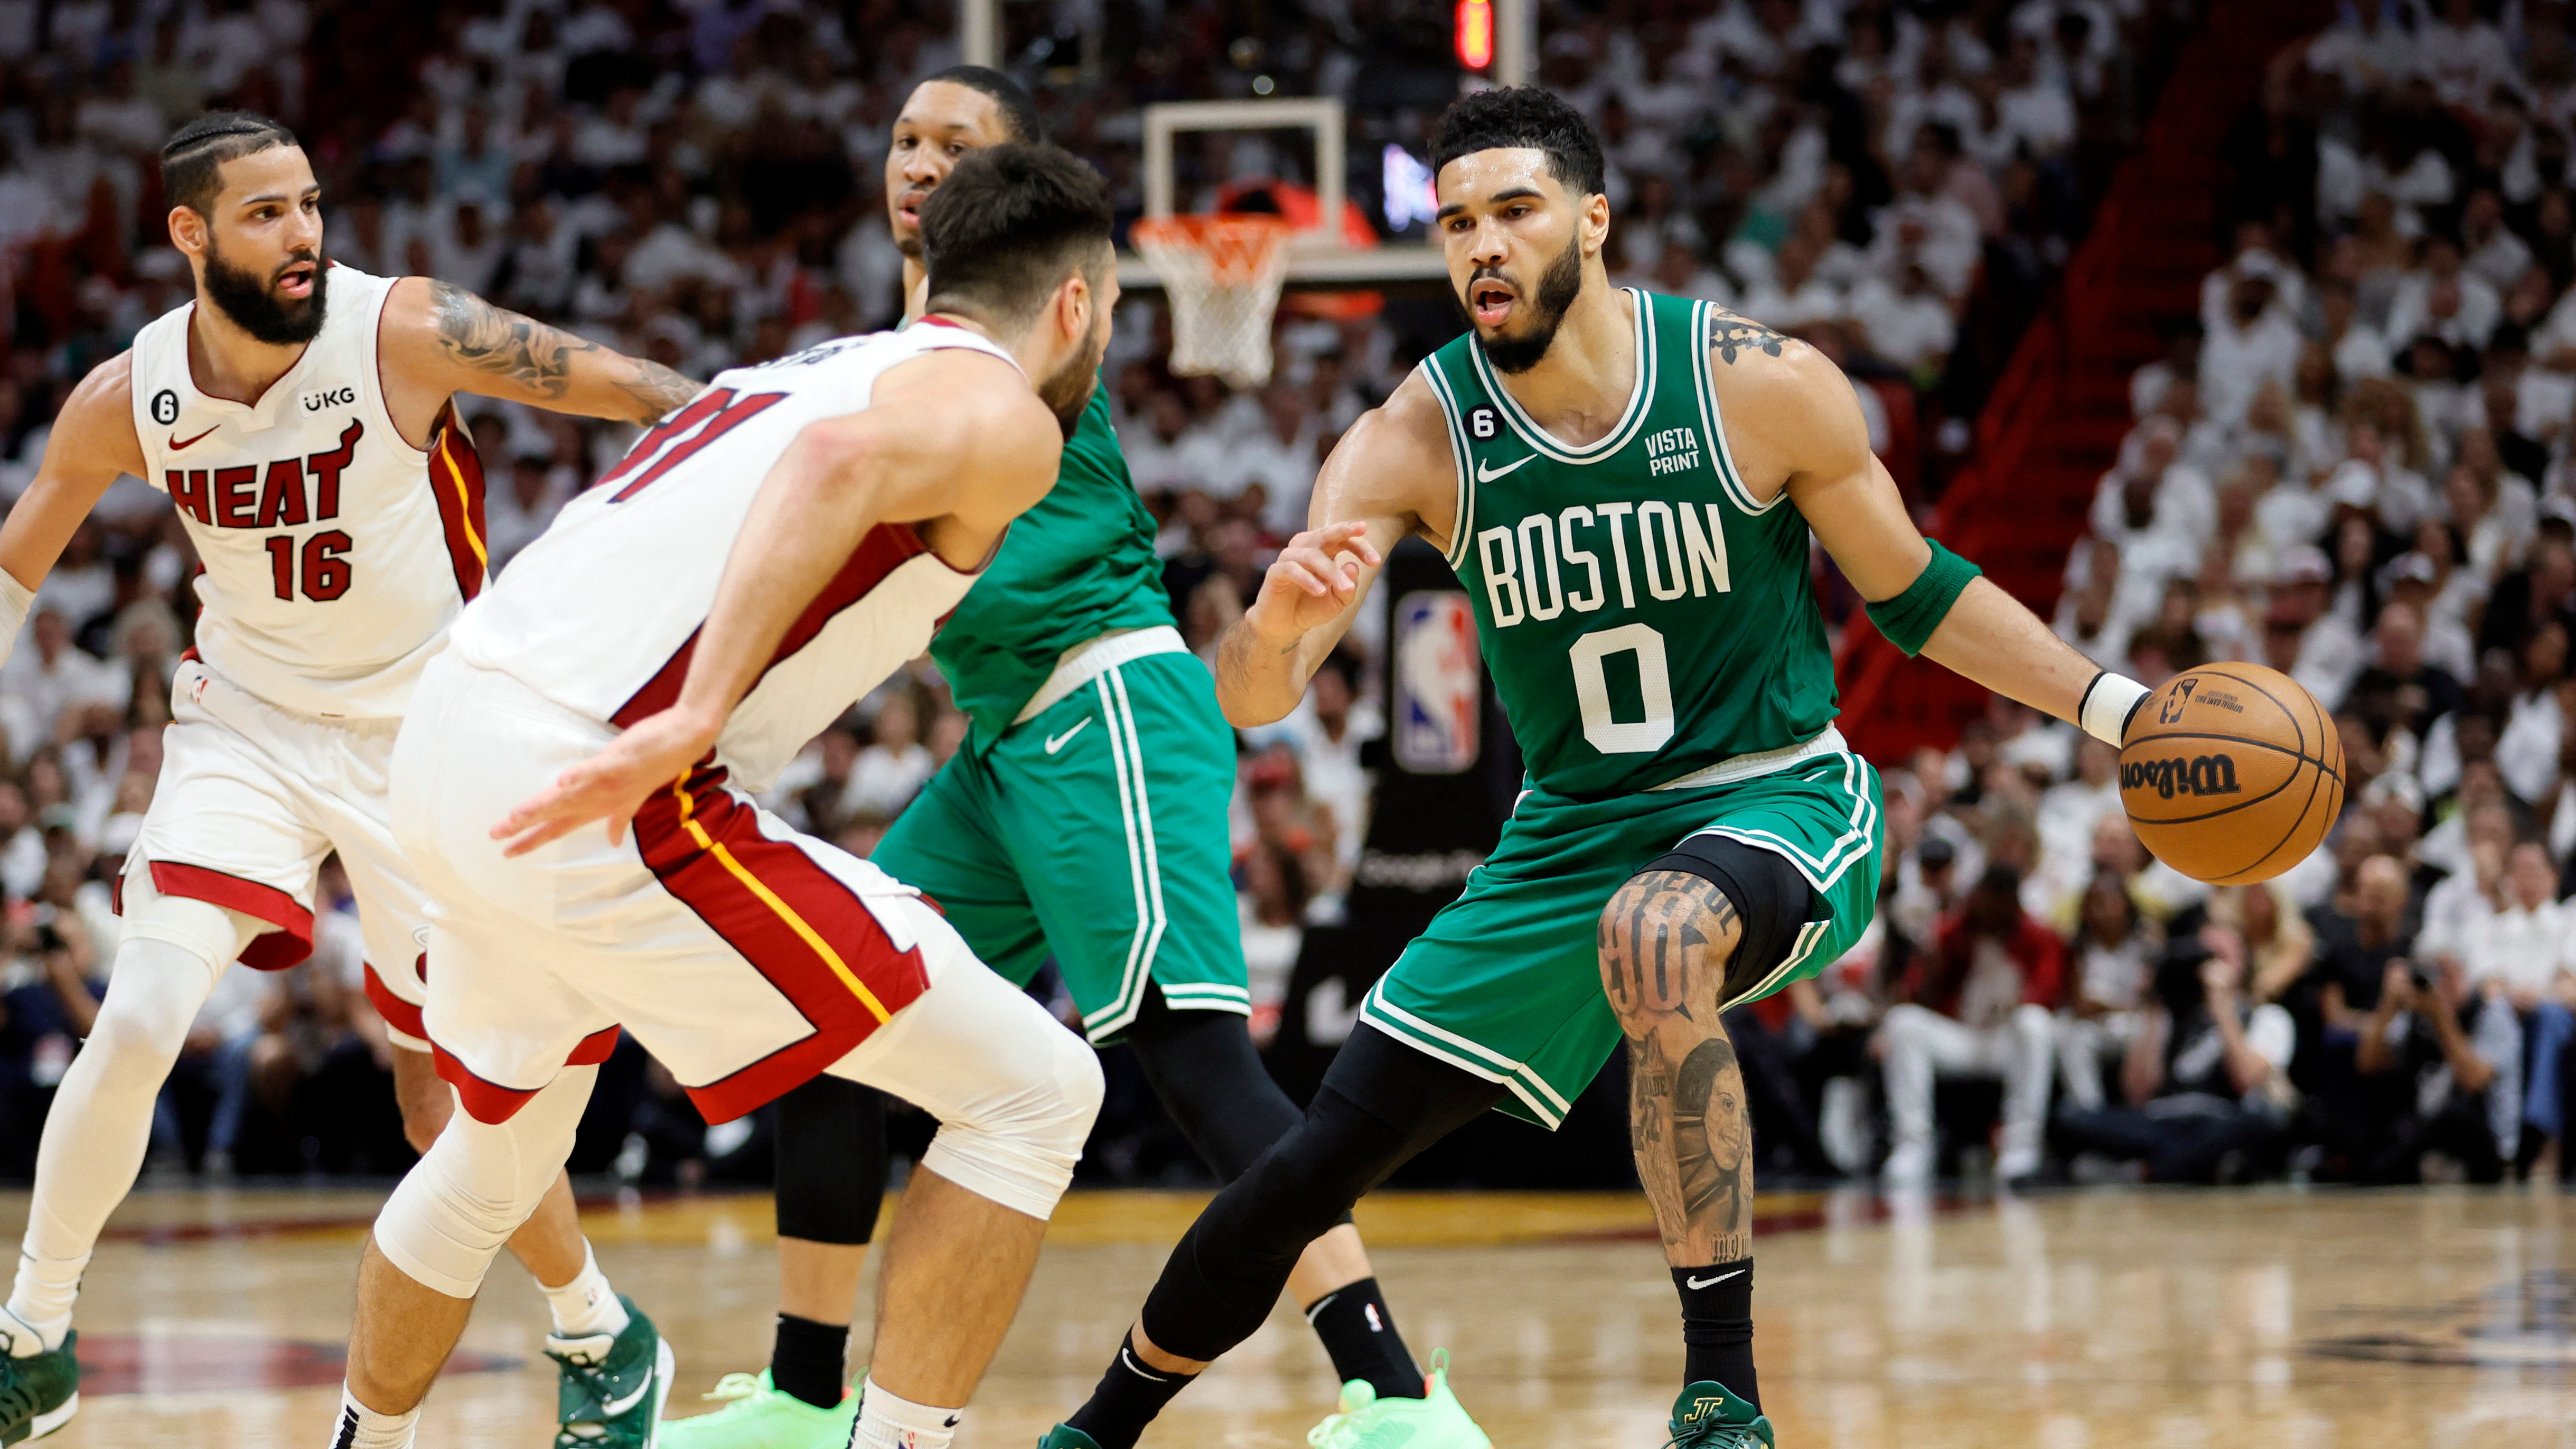 May 23, 2023; Miami, Florida, USA; Boston Celtics forward Jayson Tatum (0) controls the ball against Miami Heat guard Max Strus (31) in the third quarter during game four of the Eastern Conference Finals for the 2023 NBA playoffs at Kaseya Center. Mandatory Credit: Sam Navarro-USA TODAY Sports